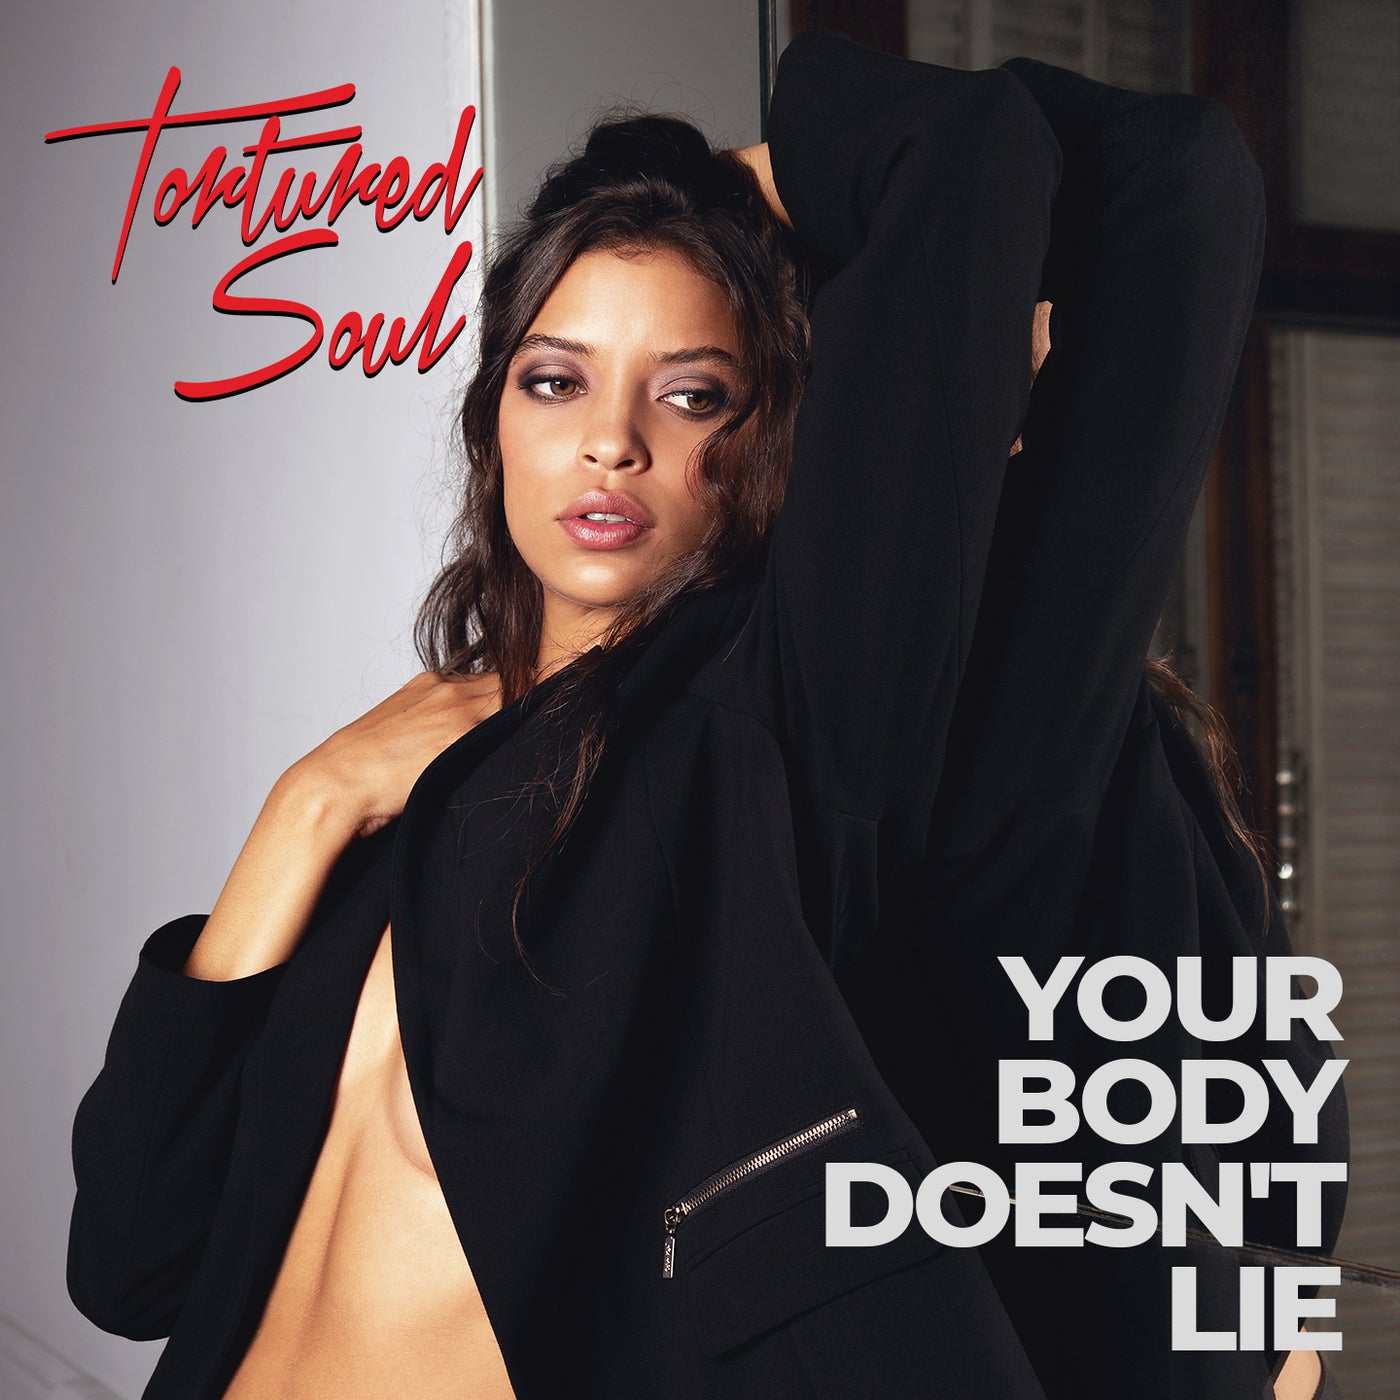 Your Body Doesn't Lie